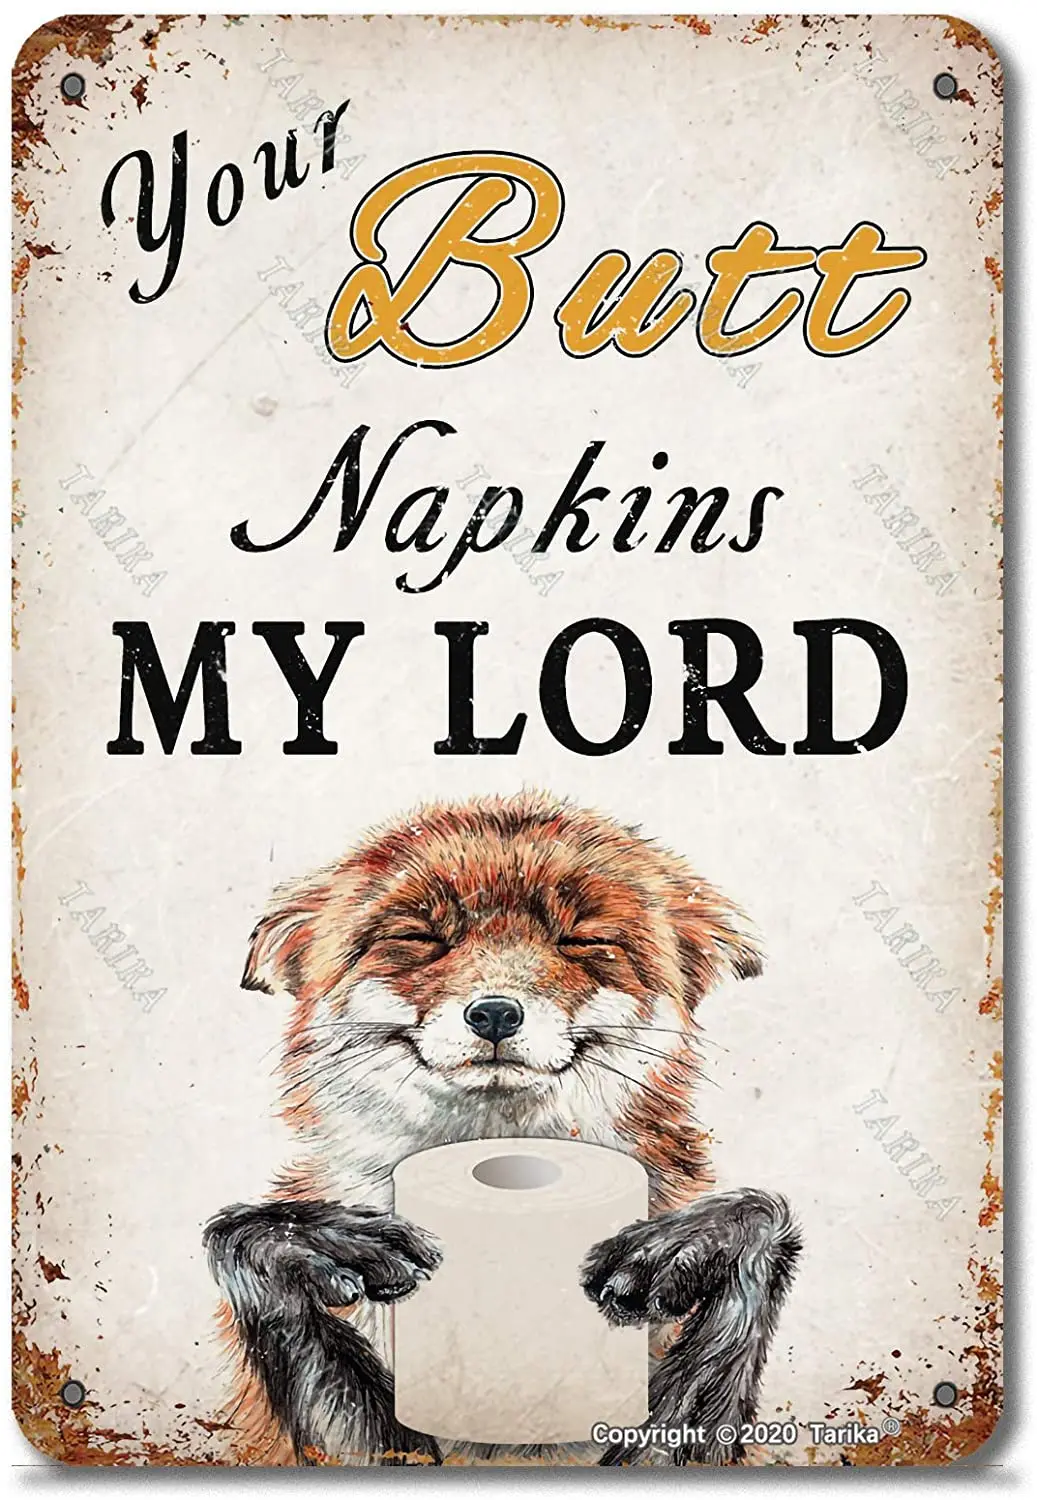 

Your Butt Napkins My Lord Fox Toilet Paper Metal 8X12 Inch Retro Look Decoration Poster Sign for Home Kitchen Bathroom Farm